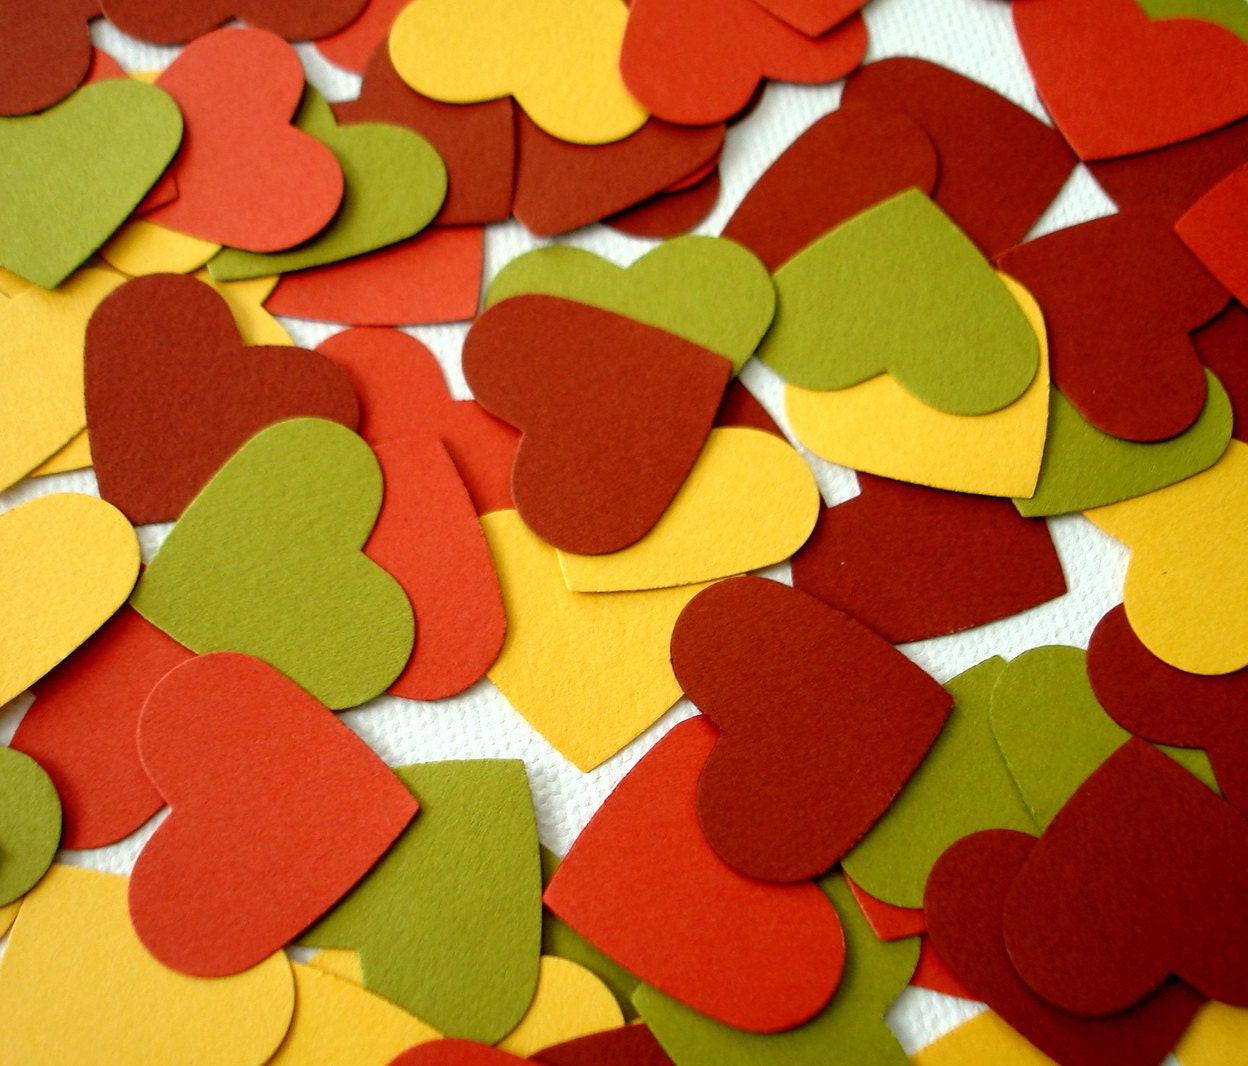 Autumn foliage wedding - 100 paper hearts confetti for a fall wedding - chesnut, olive, copper, yellow hearts - one inch - CartesdeBelleville